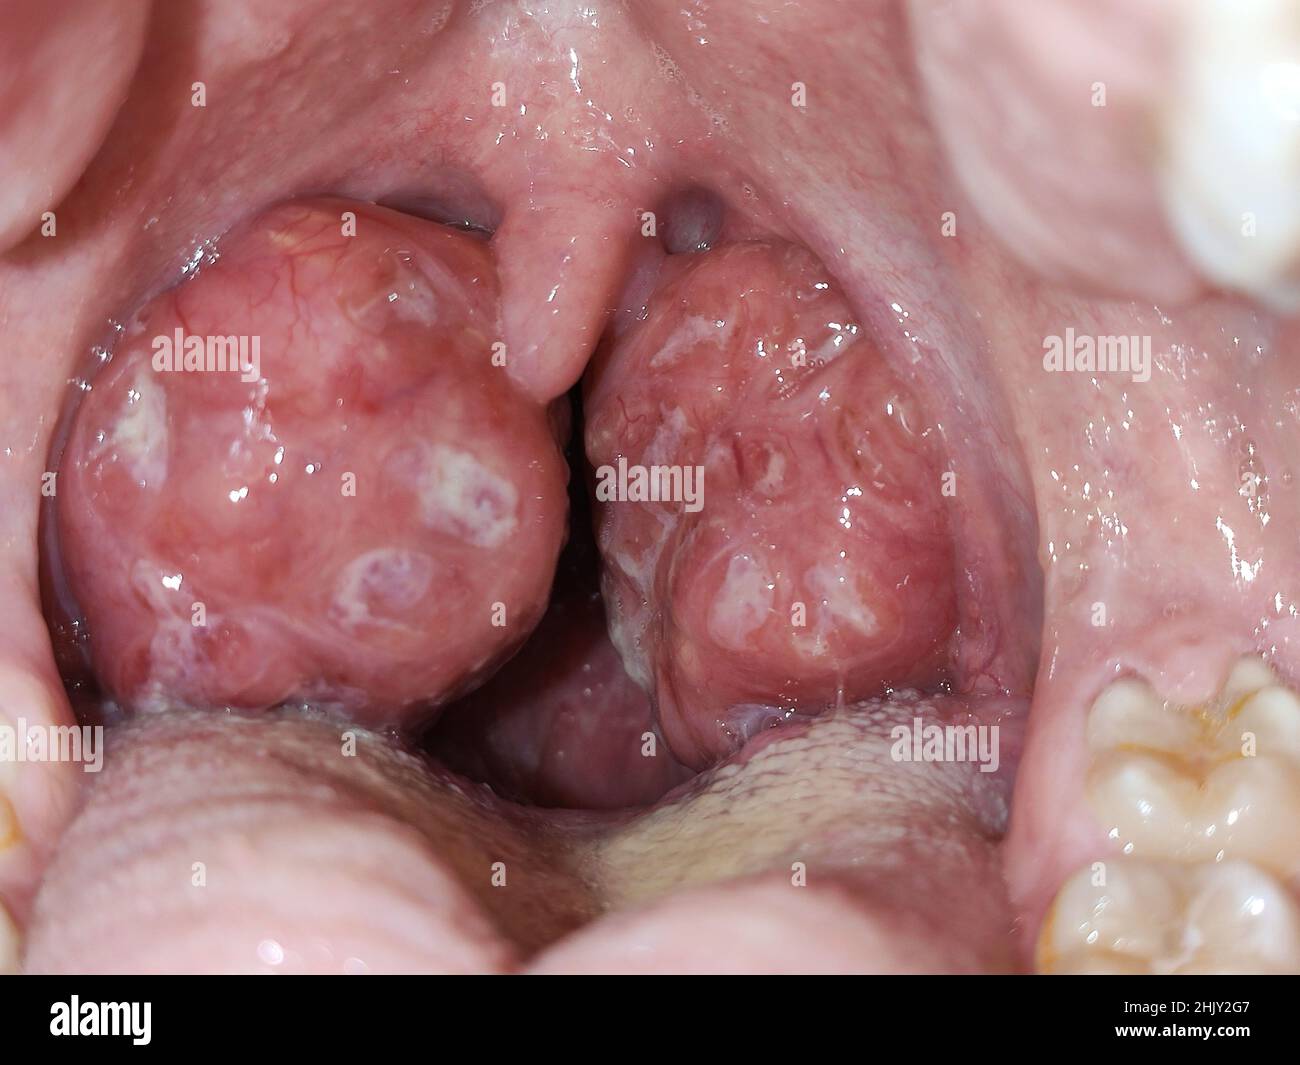 Tonsils. Swollen tonsils with plaque due to acute anguineous. Horizontal photography. Stock Photo